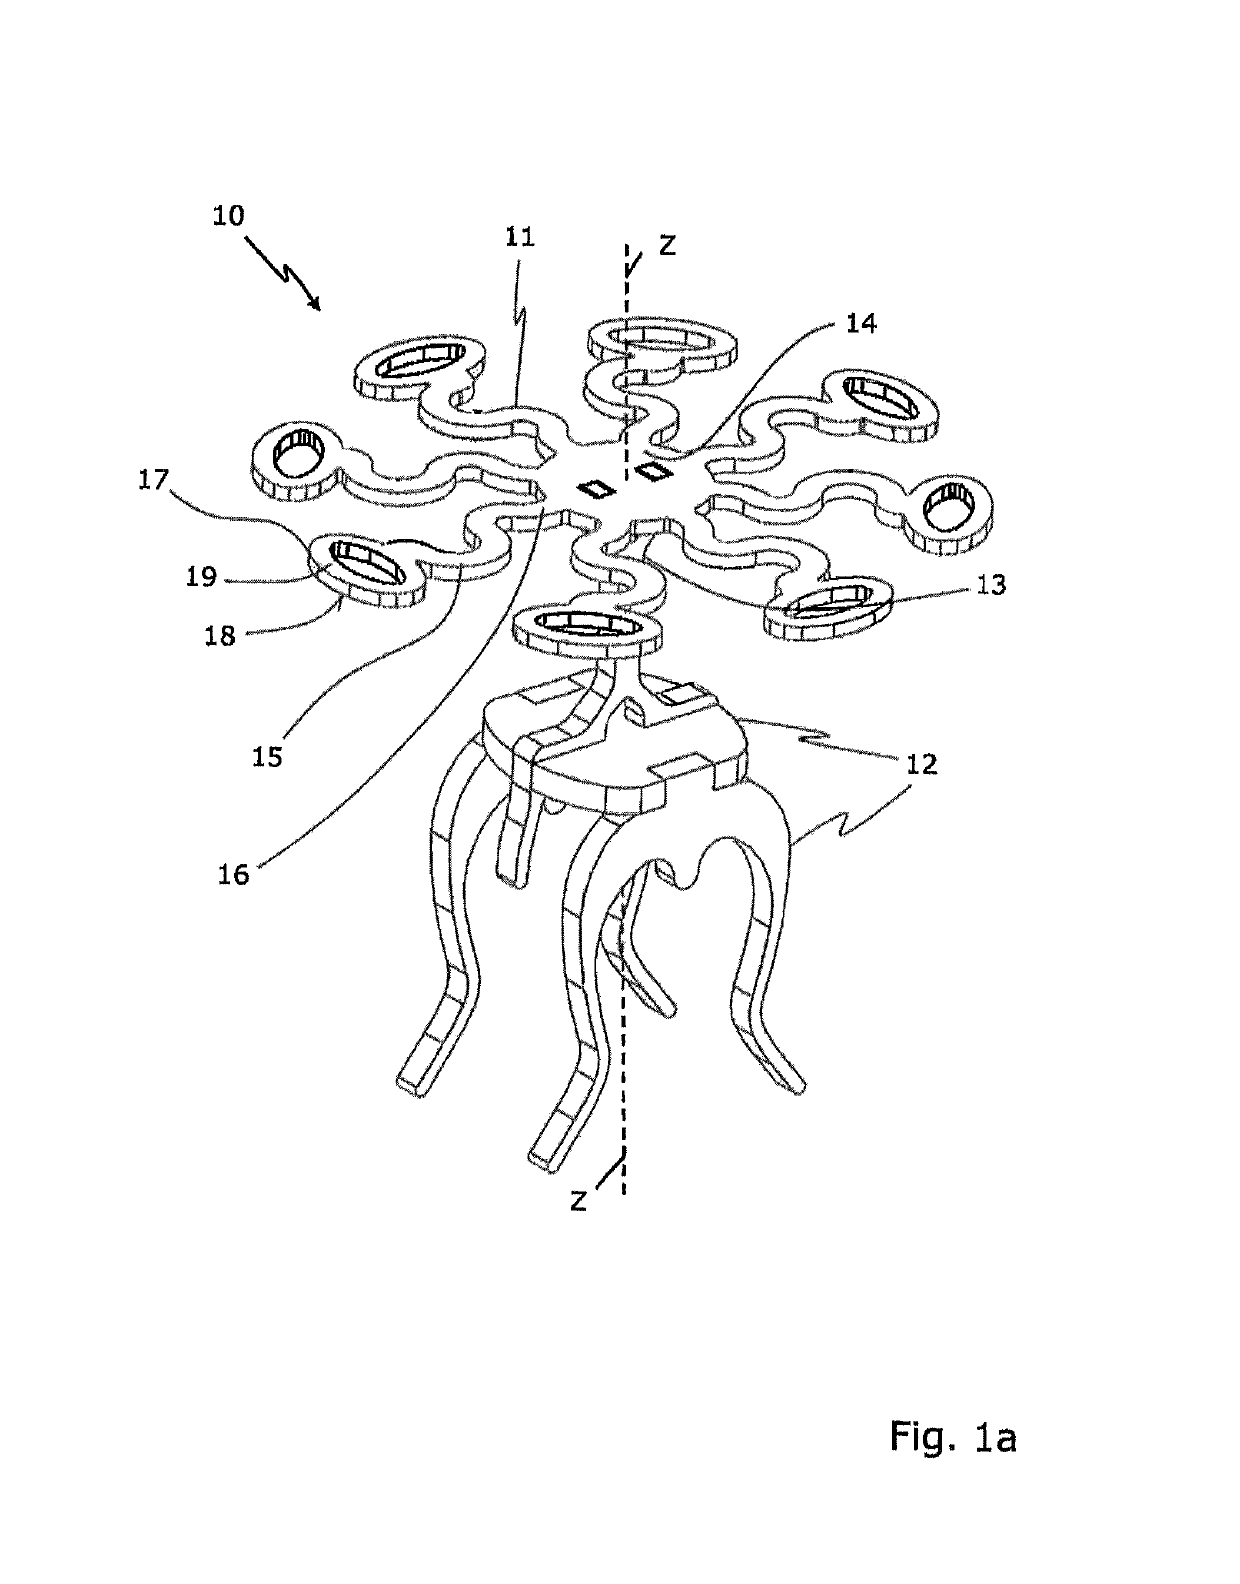 Ossicular prosthesis comprising foldable head plate